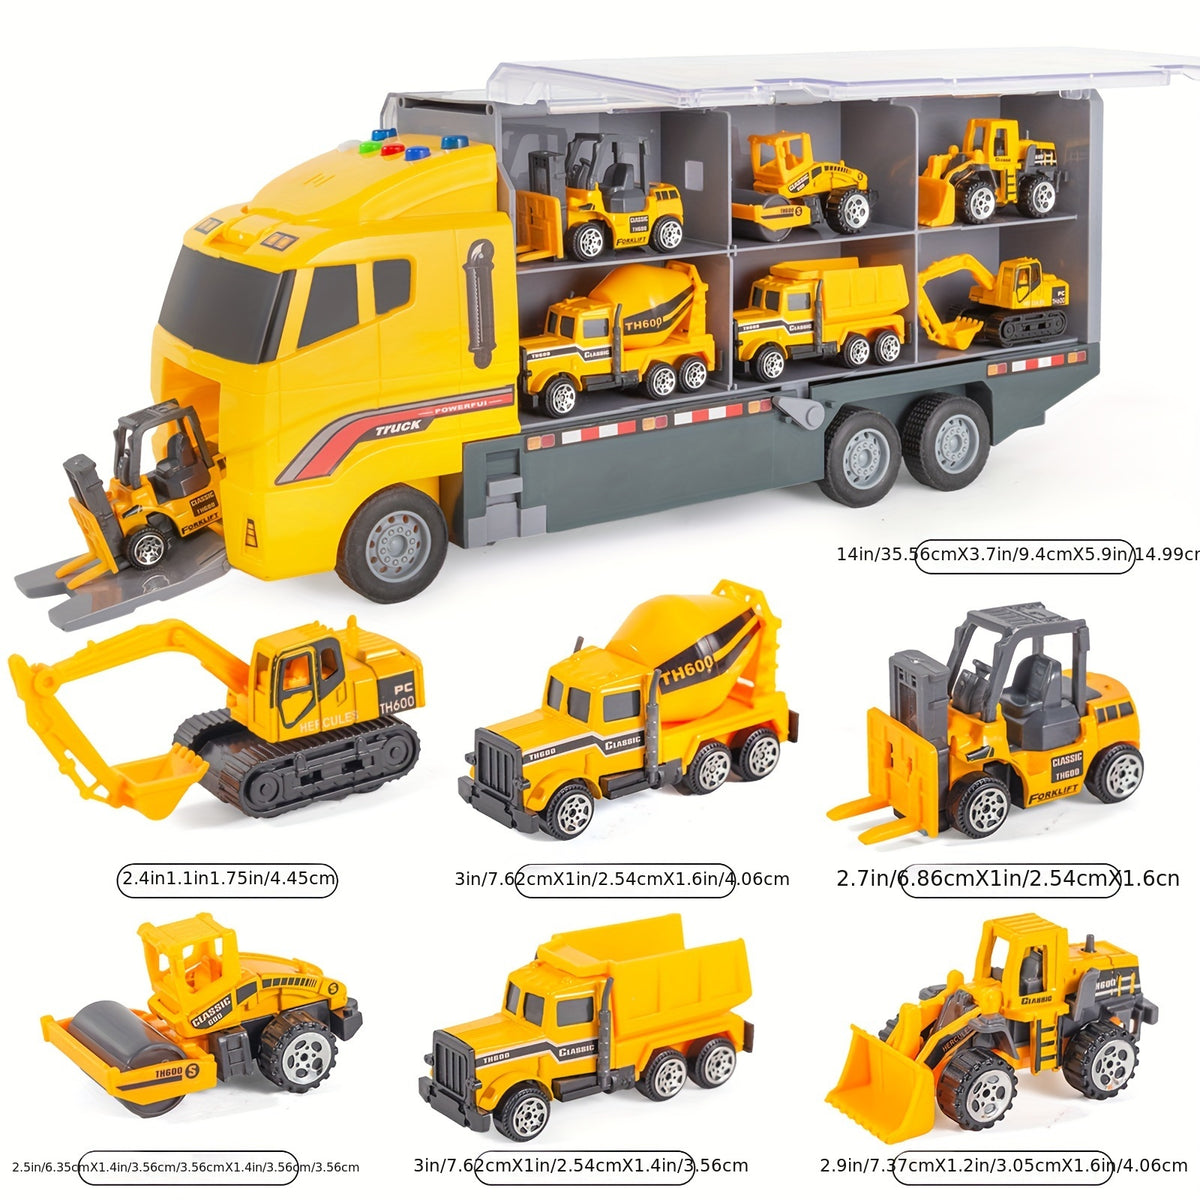 Engineering Die-cast Construction Car Toddler Toys - Perfect Gift For 5-7 Year Old Boys